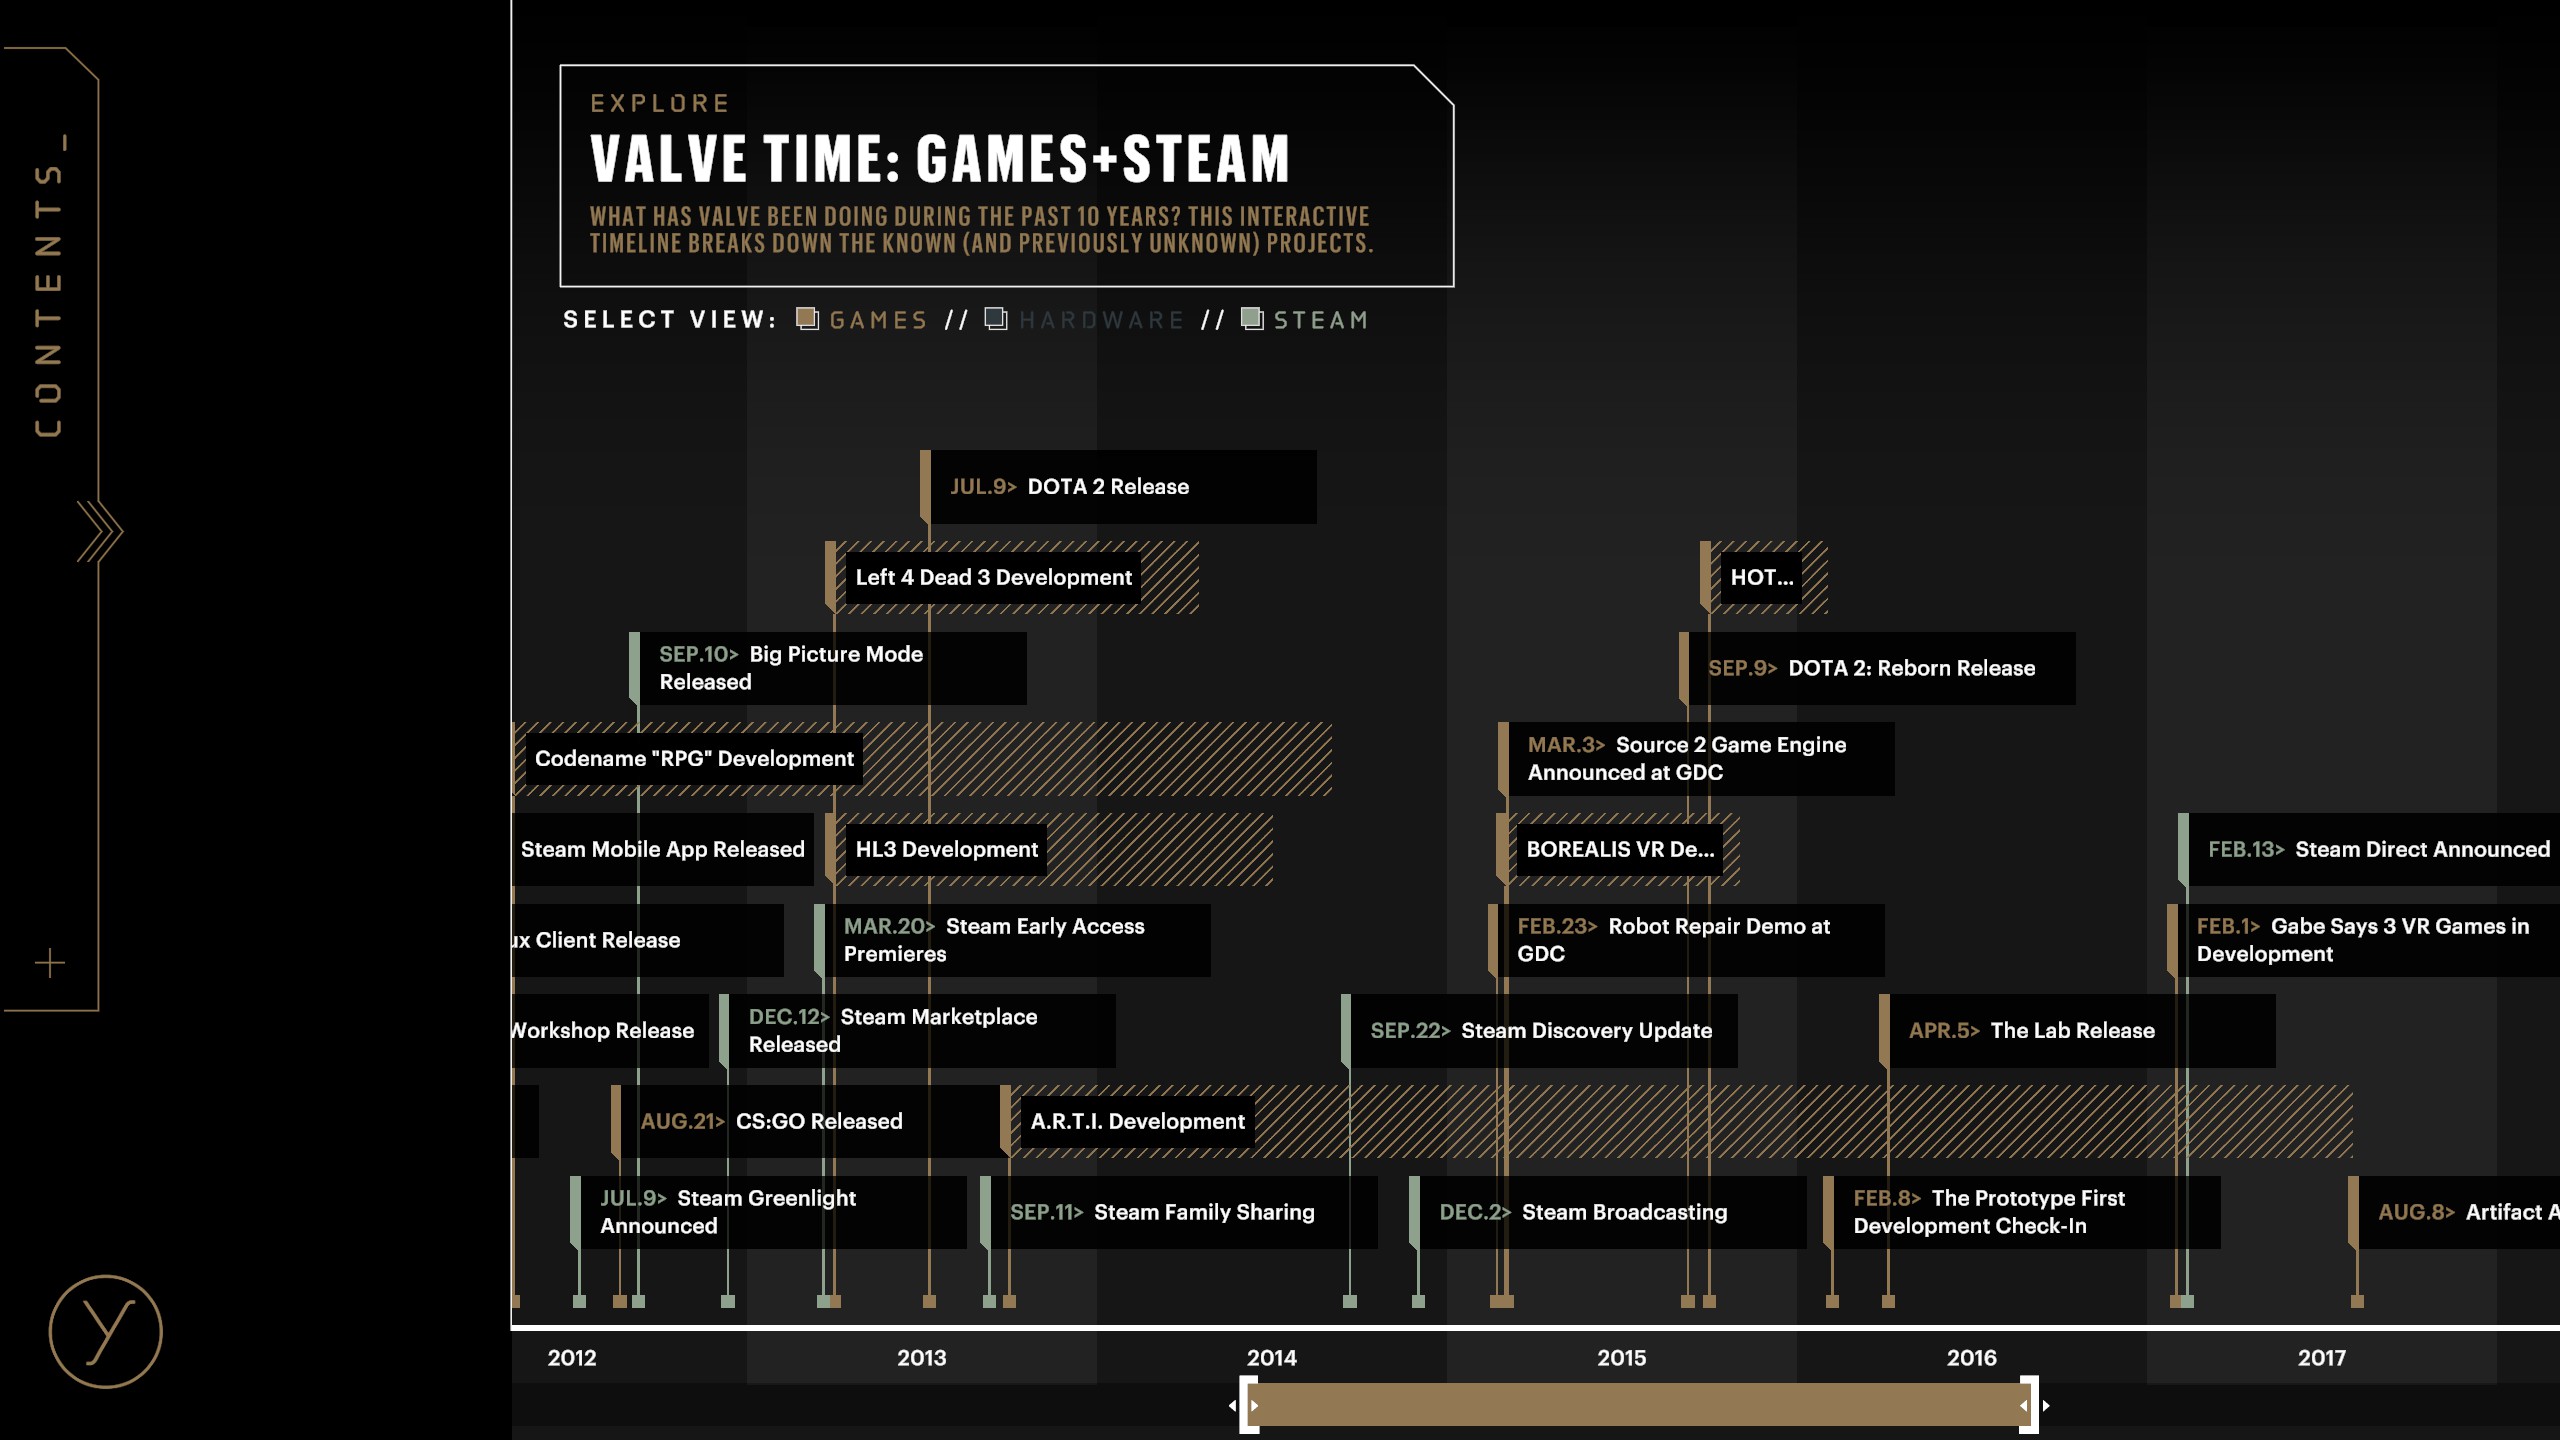 Valve's Documentary 'Free to Play' is set to release next month